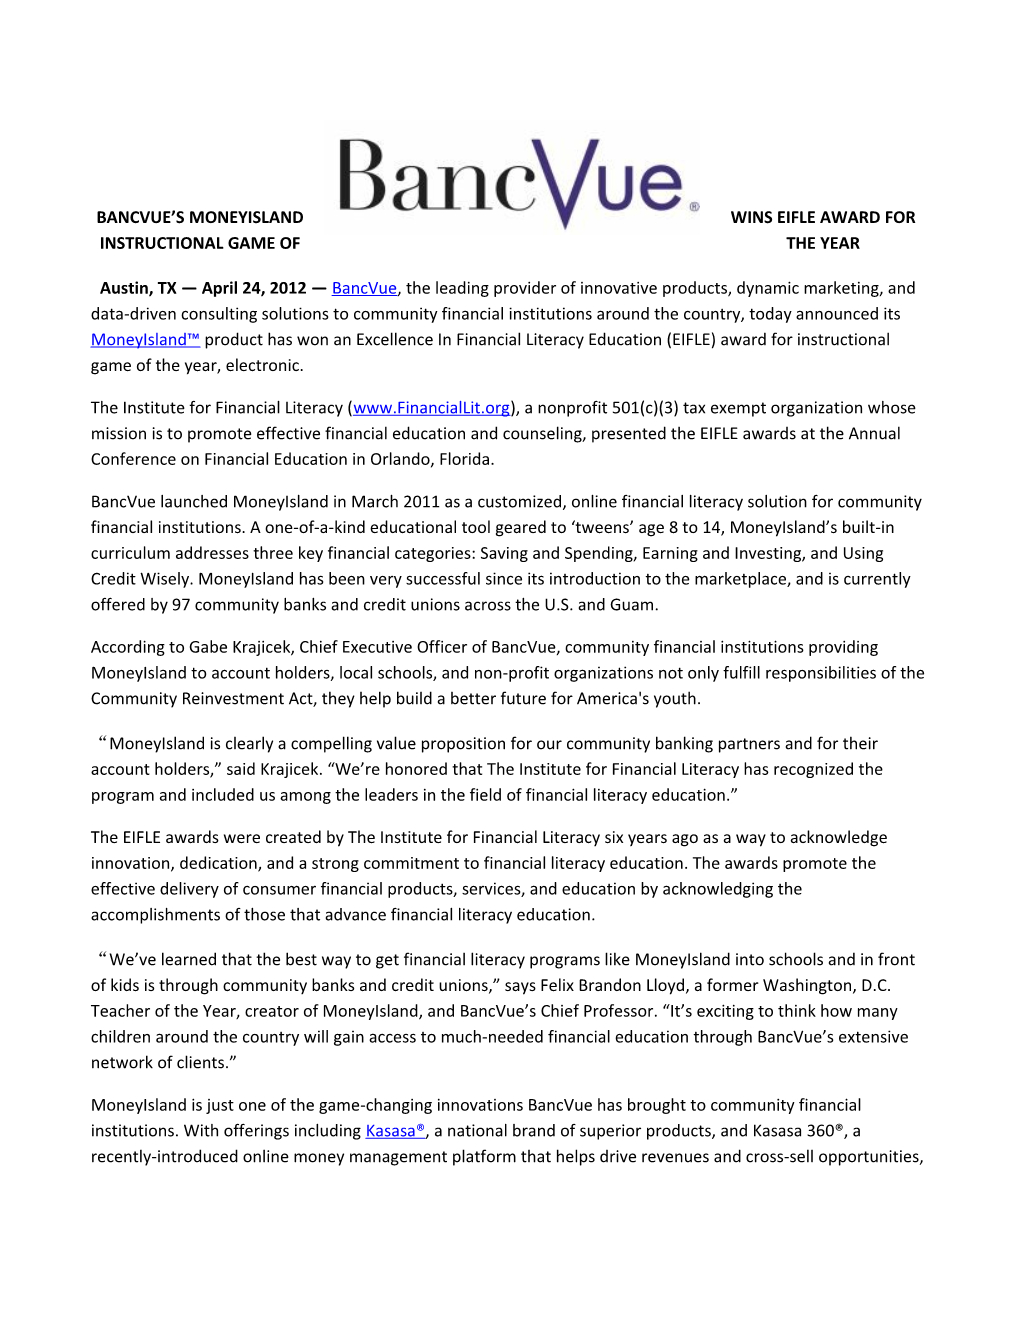 Bancvue S Moneyisland Wins Eifle Award for Instructional Game of the Year